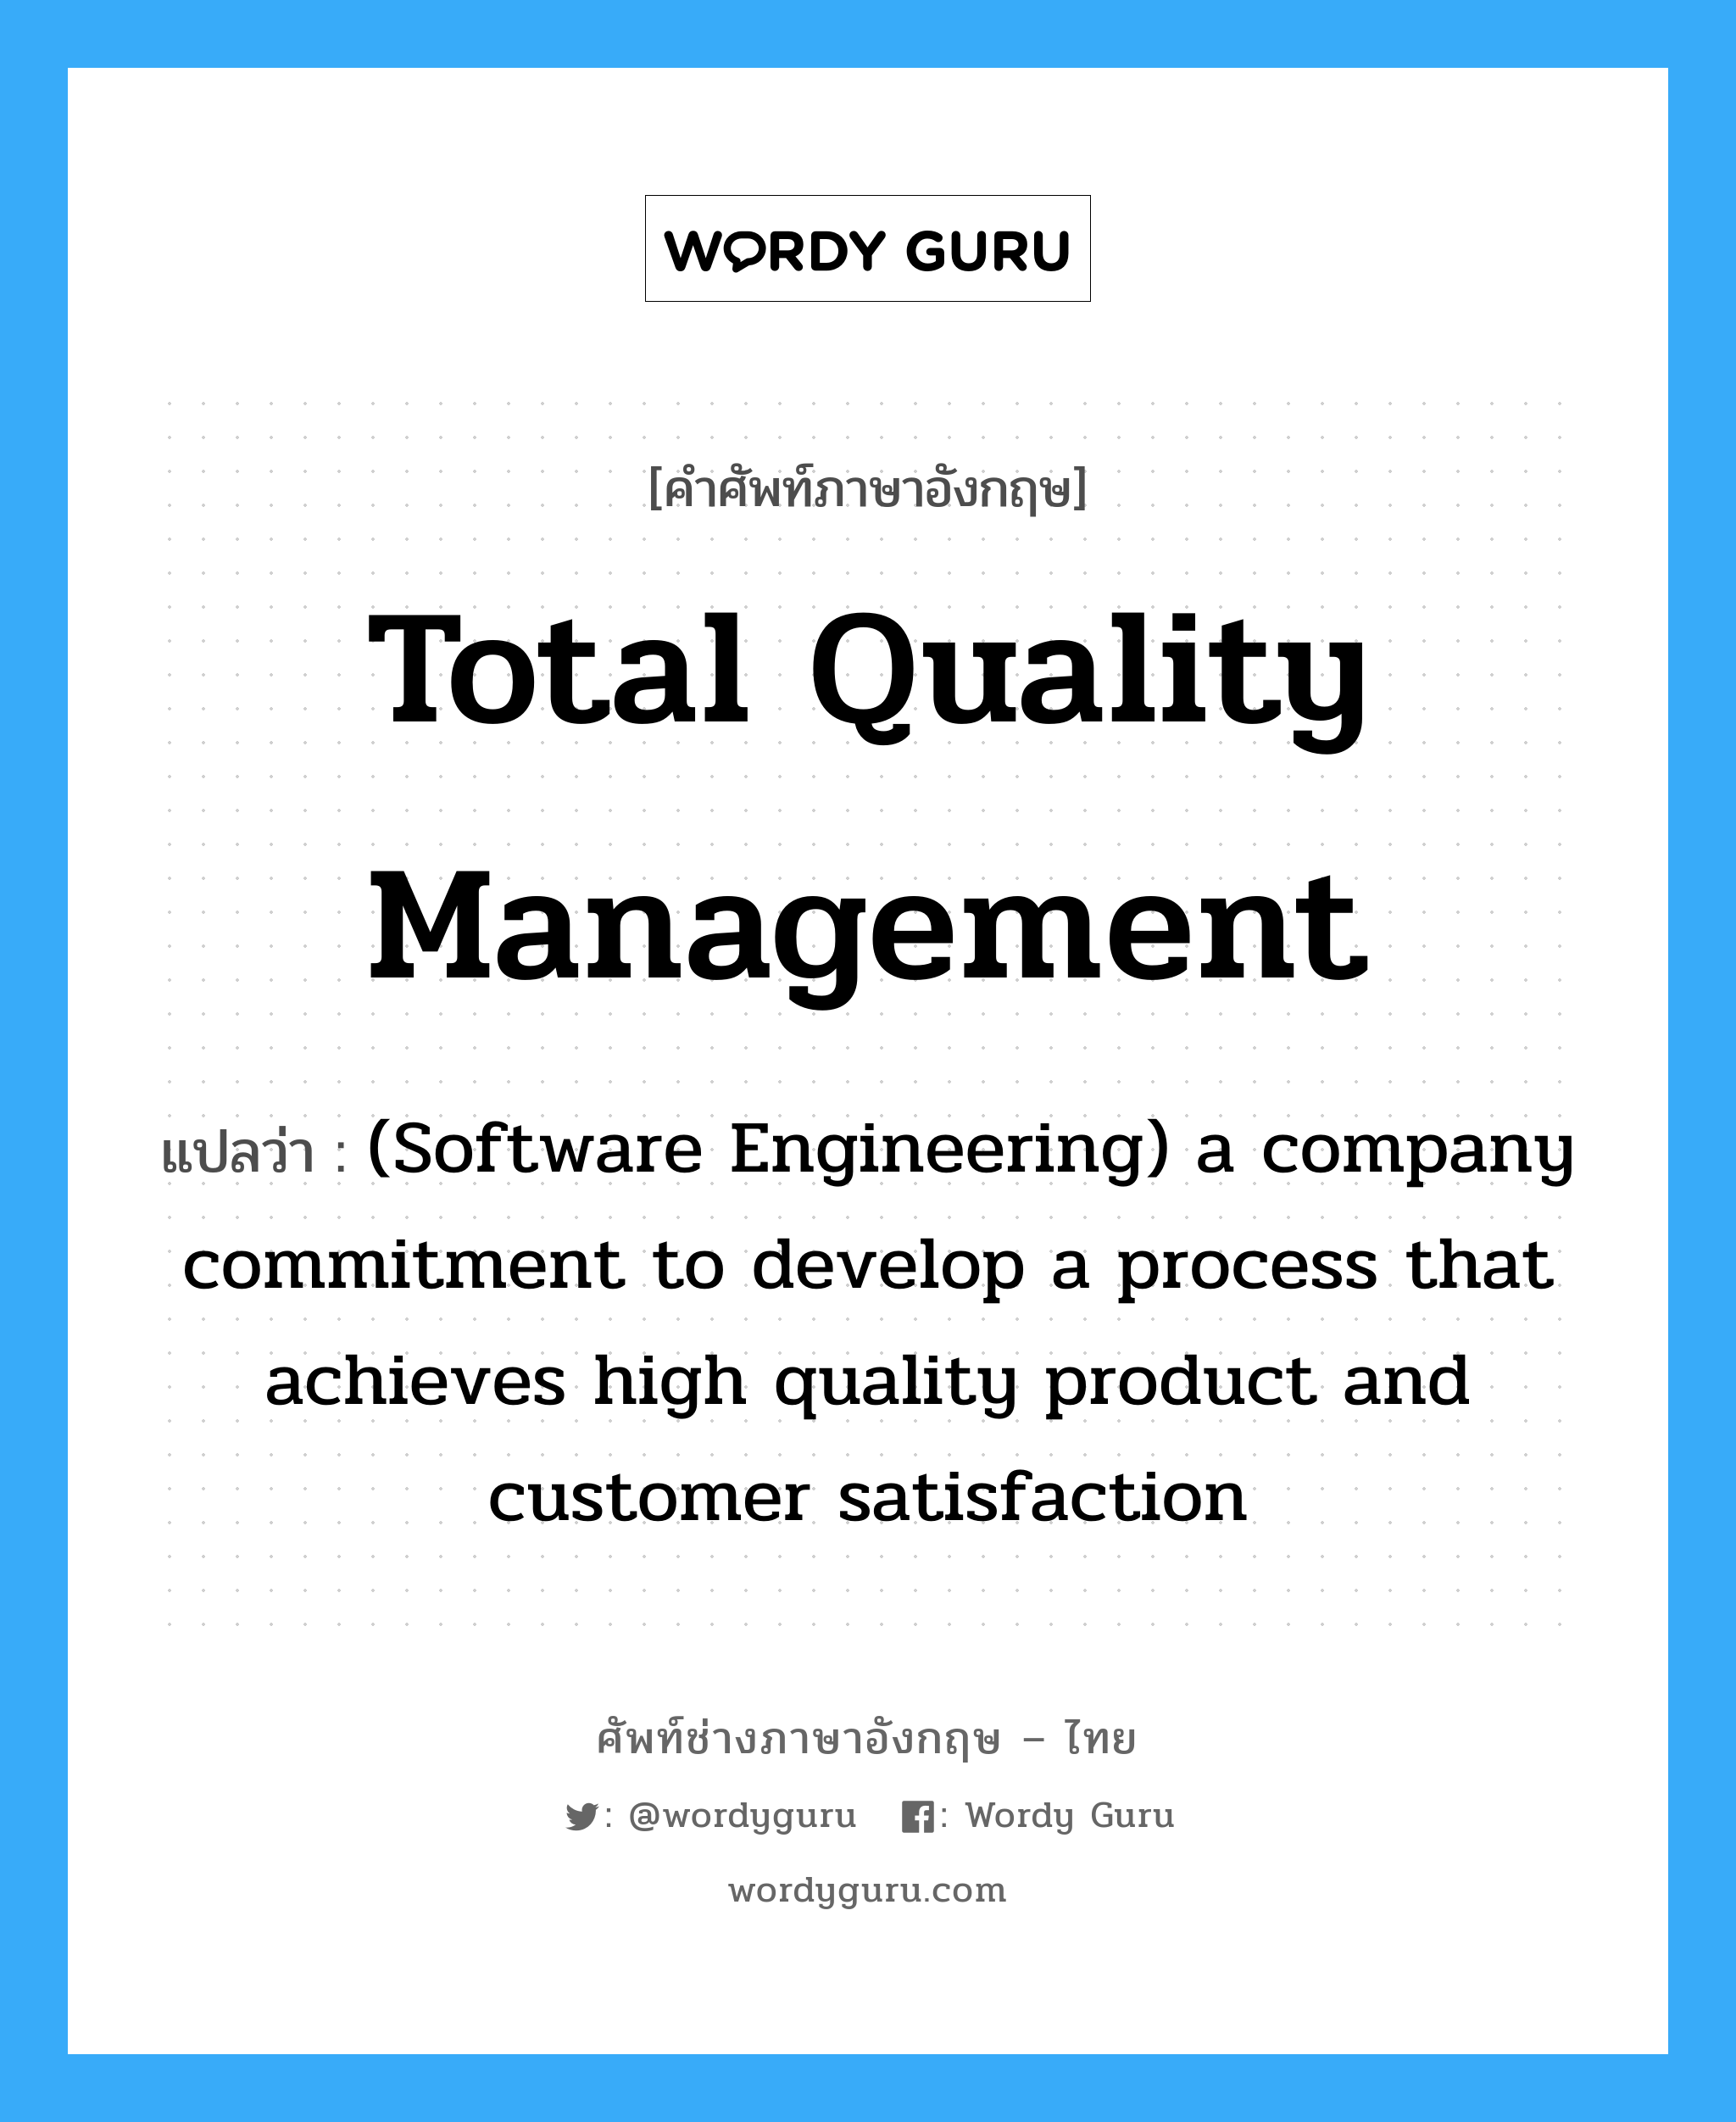 Total quality management แปลว่า?, คำศัพท์ช่างภาษาอังกฤษ - ไทย Total quality management คำศัพท์ภาษาอังกฤษ Total quality management แปลว่า (Software Engineering) a company commitment to develop a process that achieves high quality product and customer satisfaction